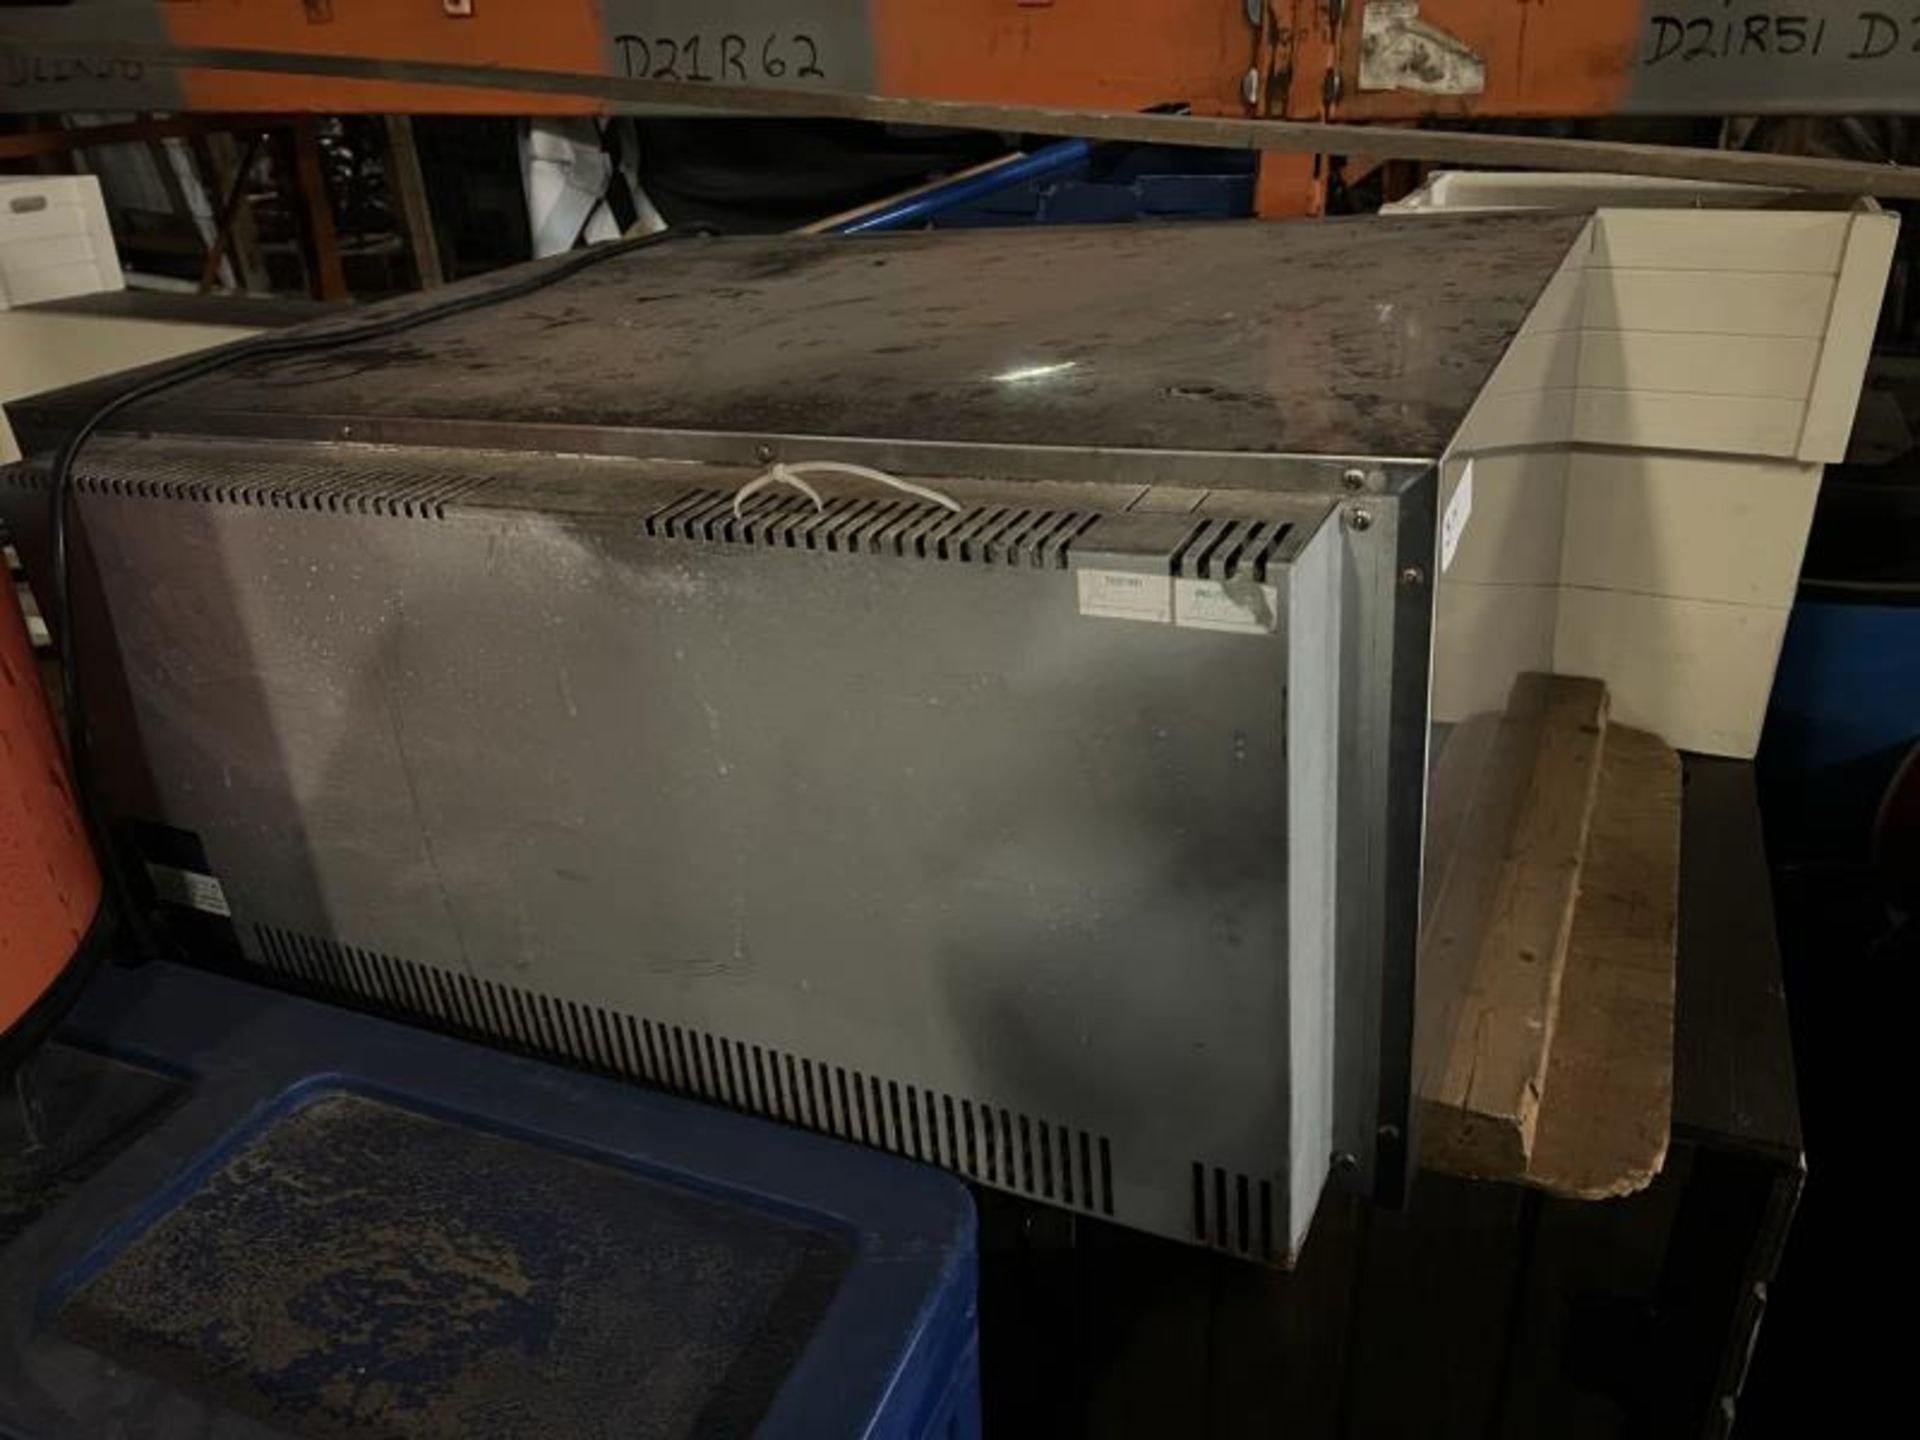 Lot of Pizza Oven, 3-Bay Steam Table, 2-Door Under Counter Refrigerator, Condition Unknown, - Image 2 of 3